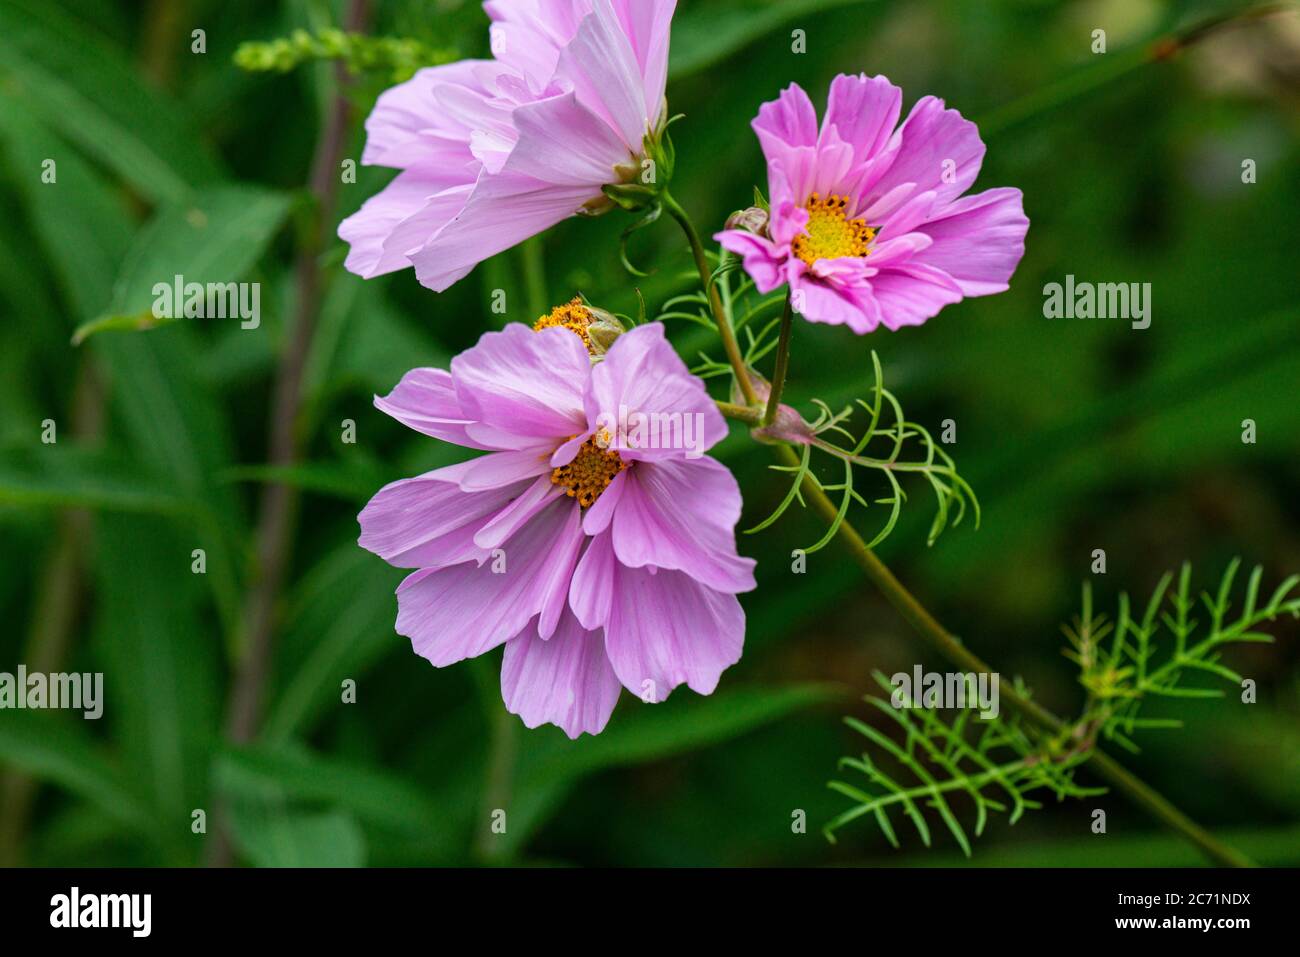 The flowers of a Cosmos 'Sea Shells' Stock Photo